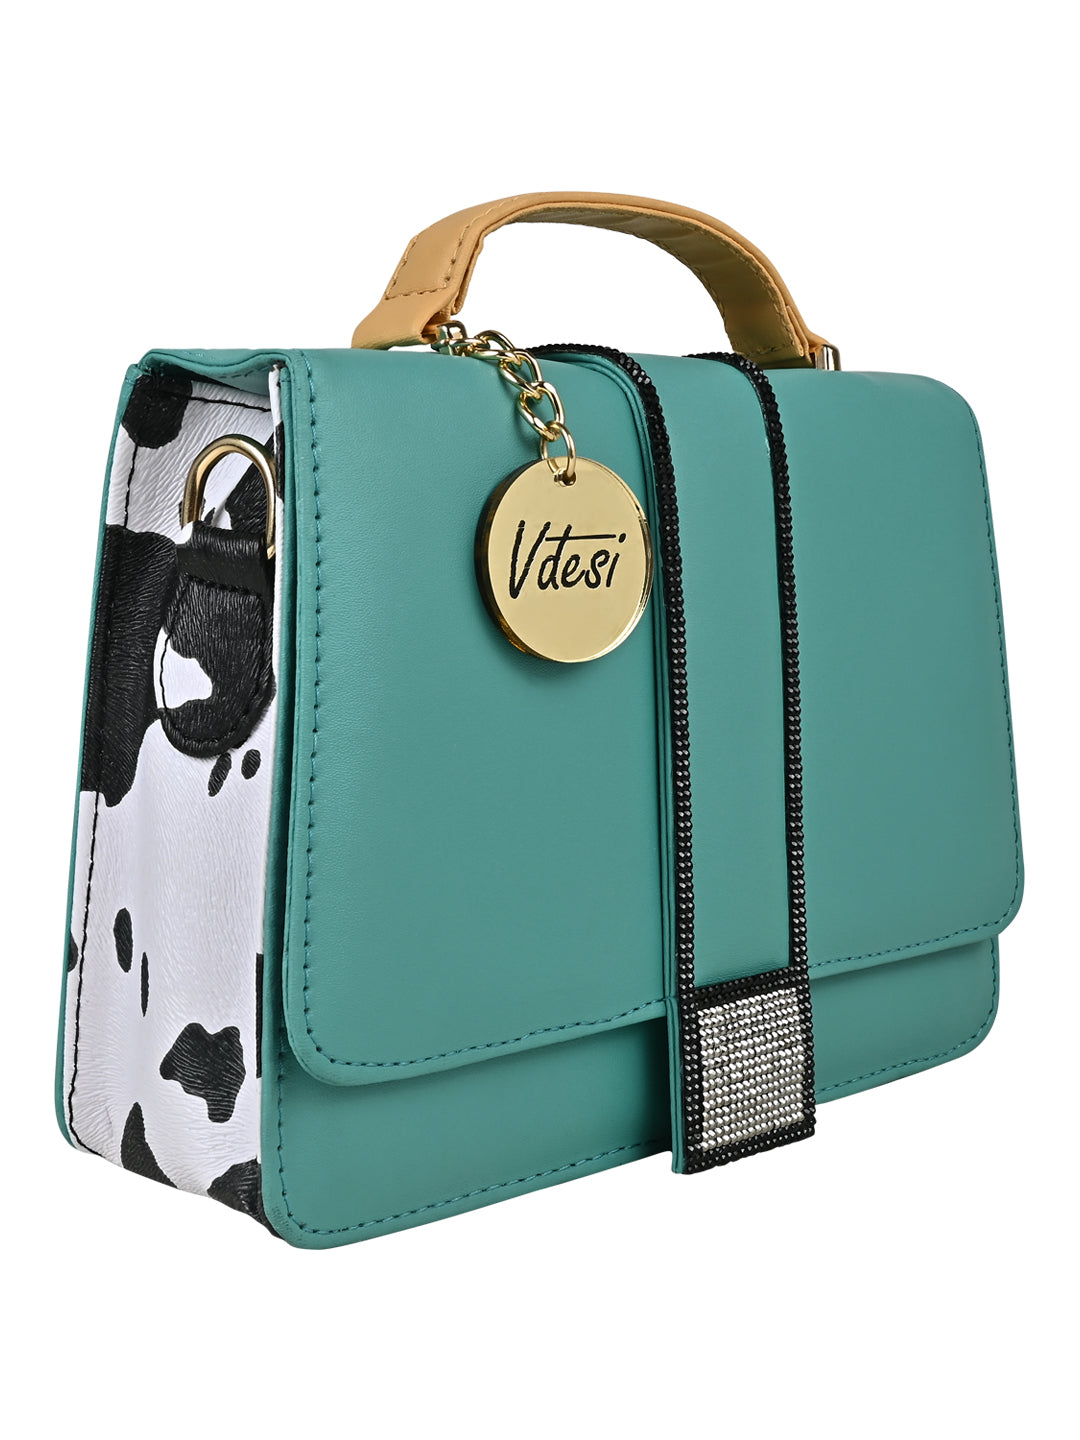 It has a cow print on it. It is a must-have sling bag.